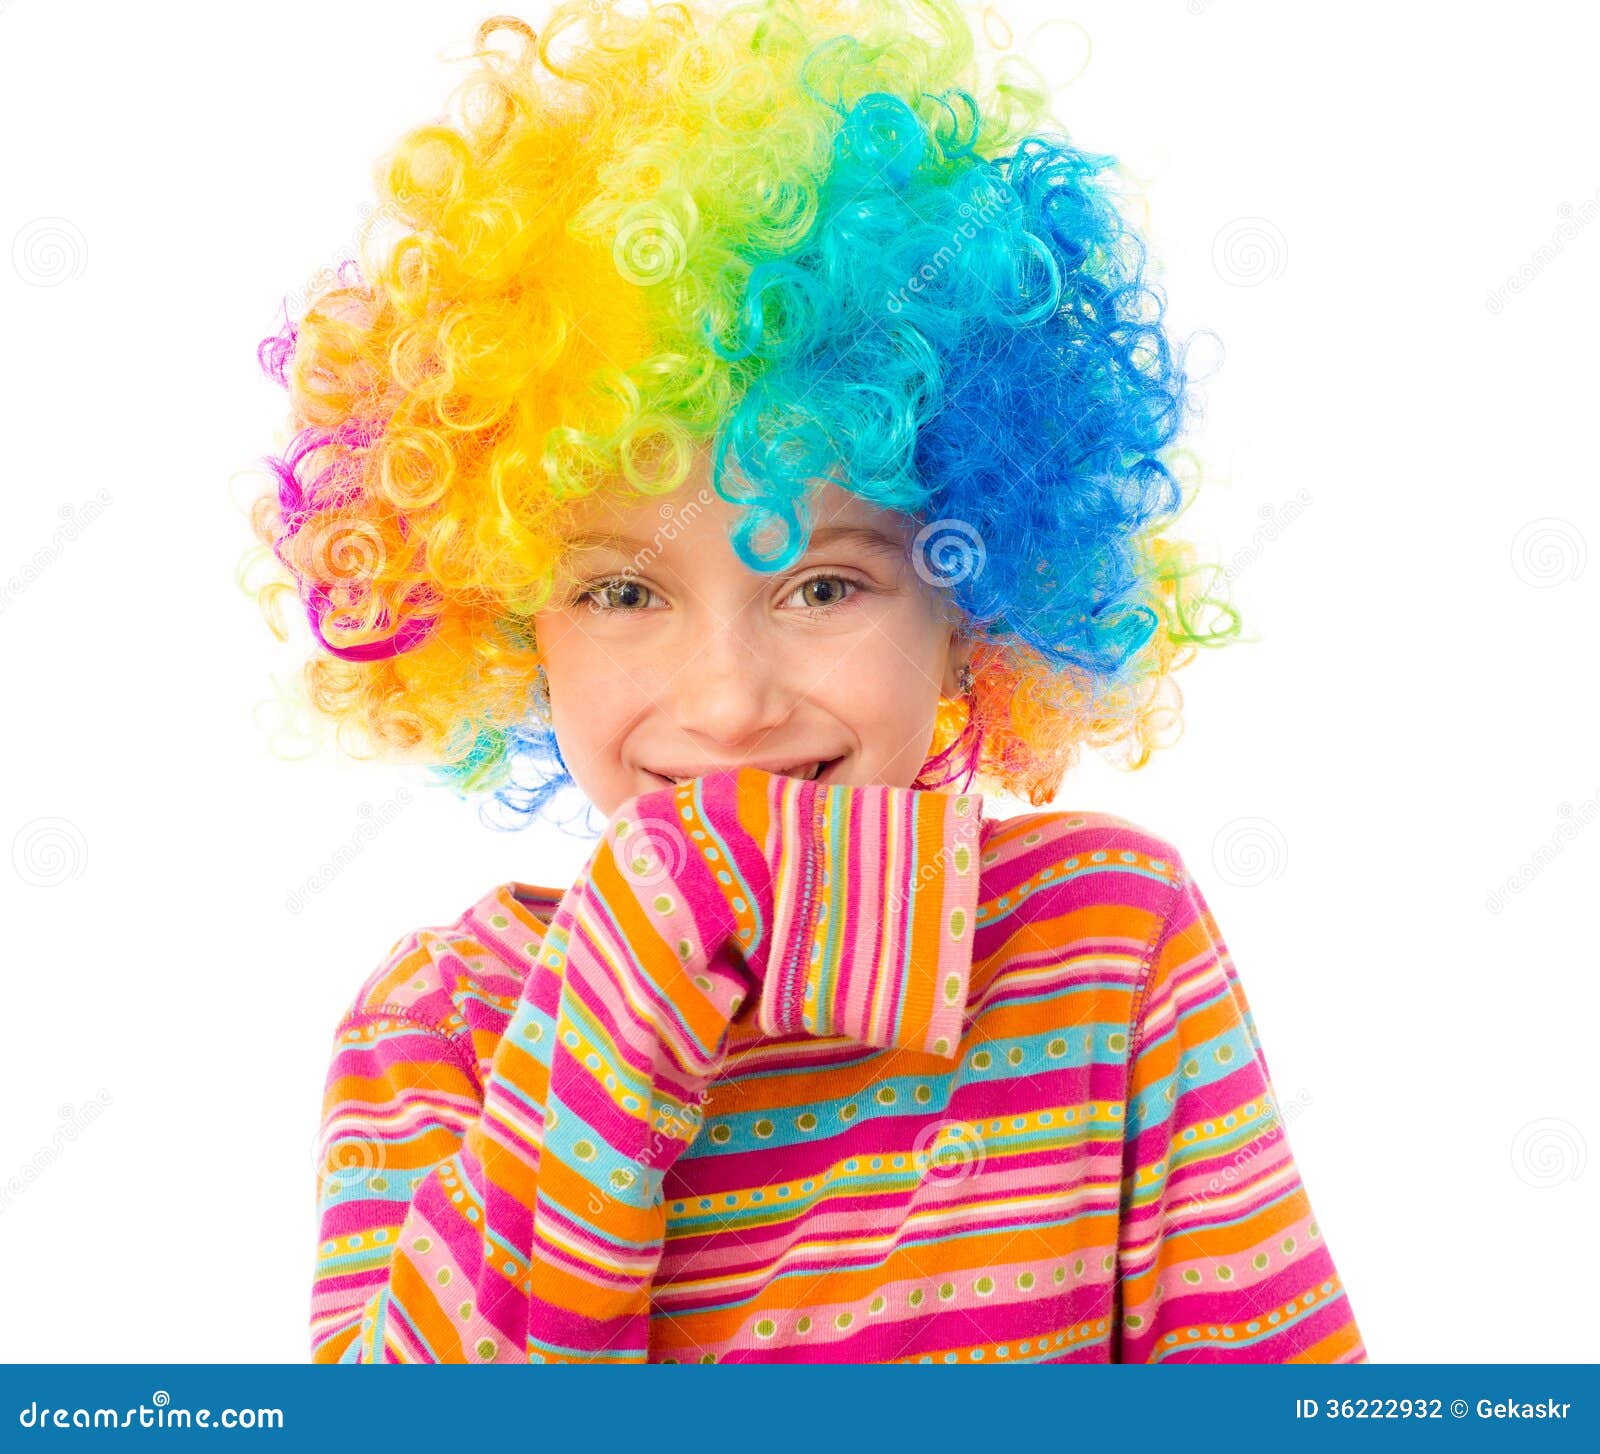 Little girl in clown wig stock photo. Image of expression - 36222932